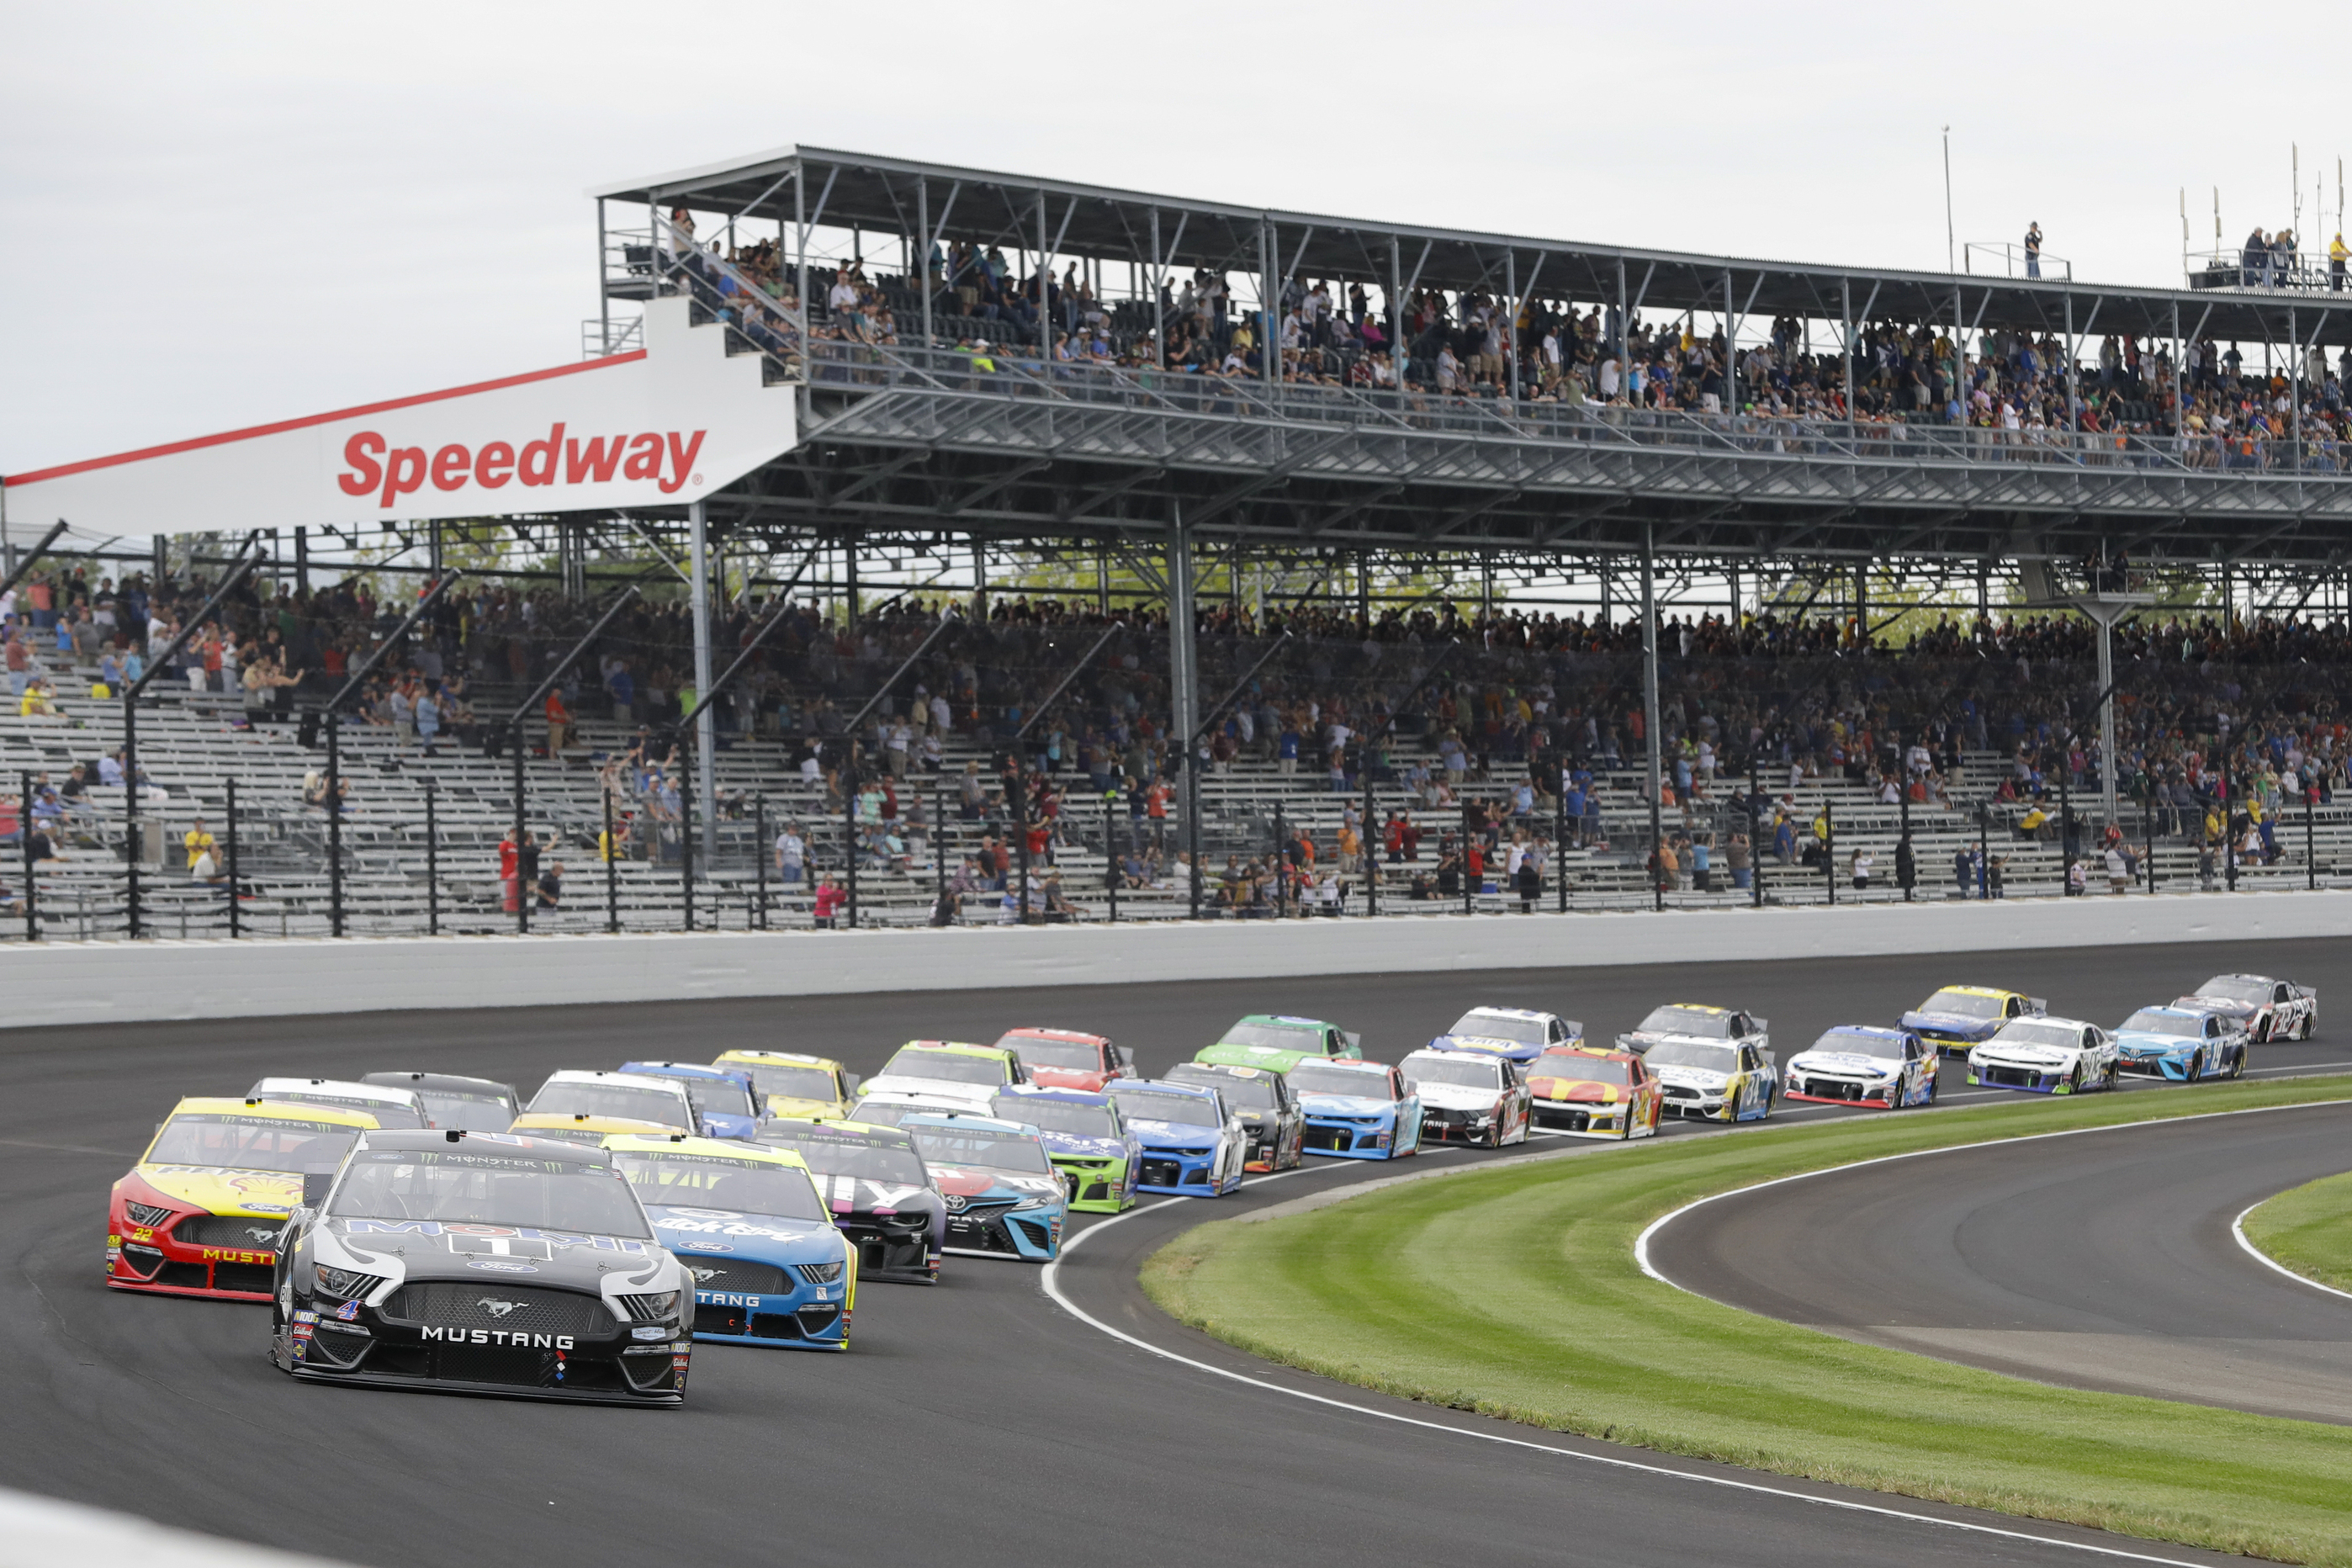 NASCAR on TV How to watch Sundays (7-5-2020) Brickyard 400 without cable 